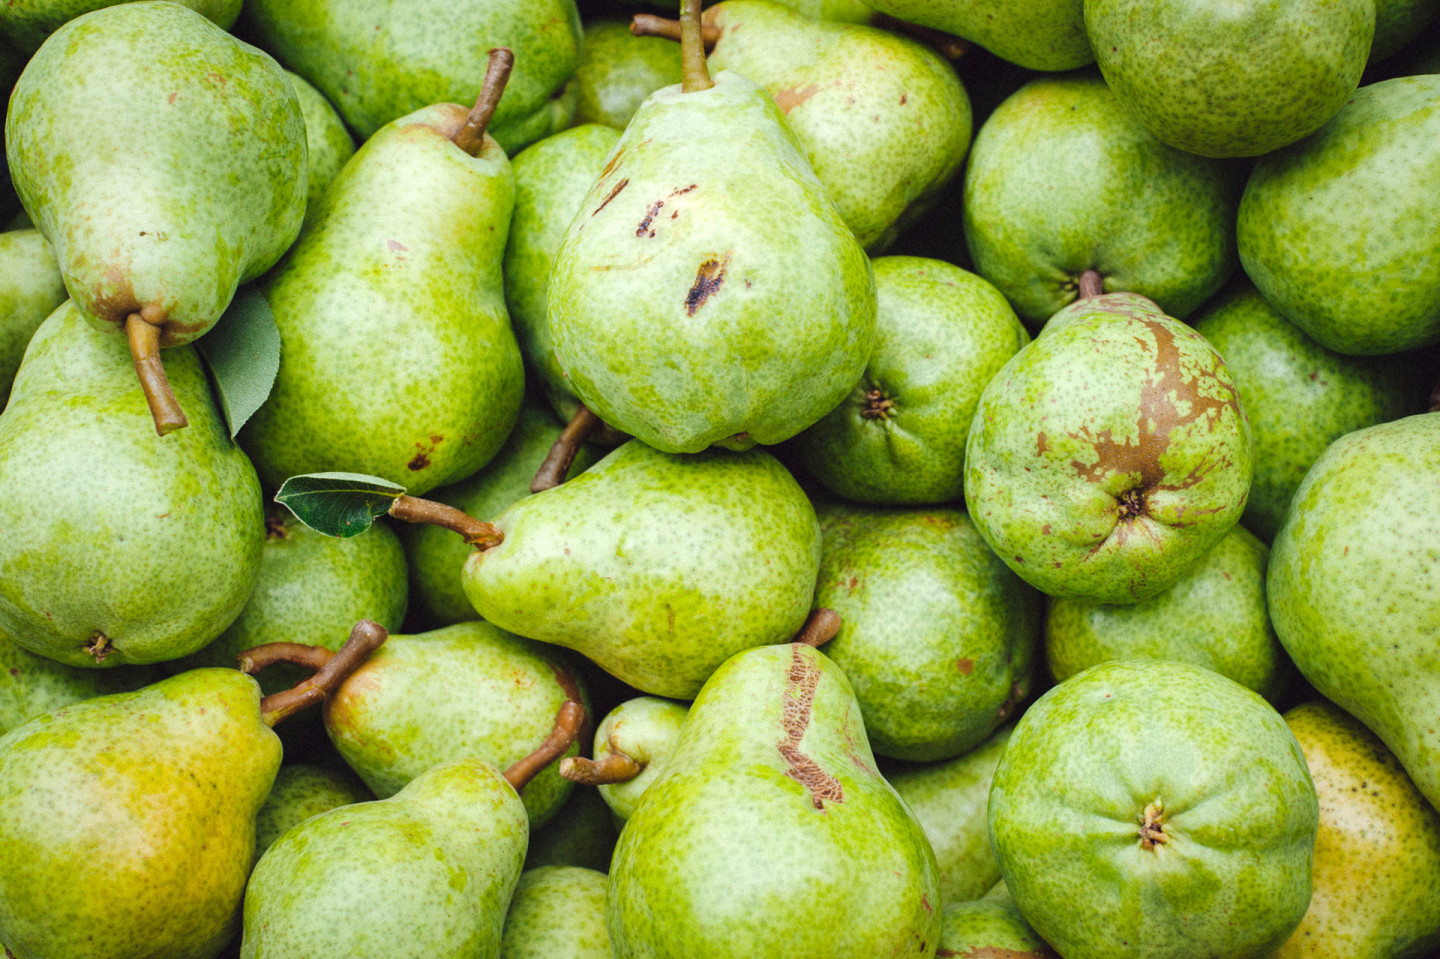 Pears with cosmetic blemishes such as "limb rub" -- surface imperfections that have nothing to do with quality or taste -- wind up in a different market category. Cynthia E. Wood/KQED